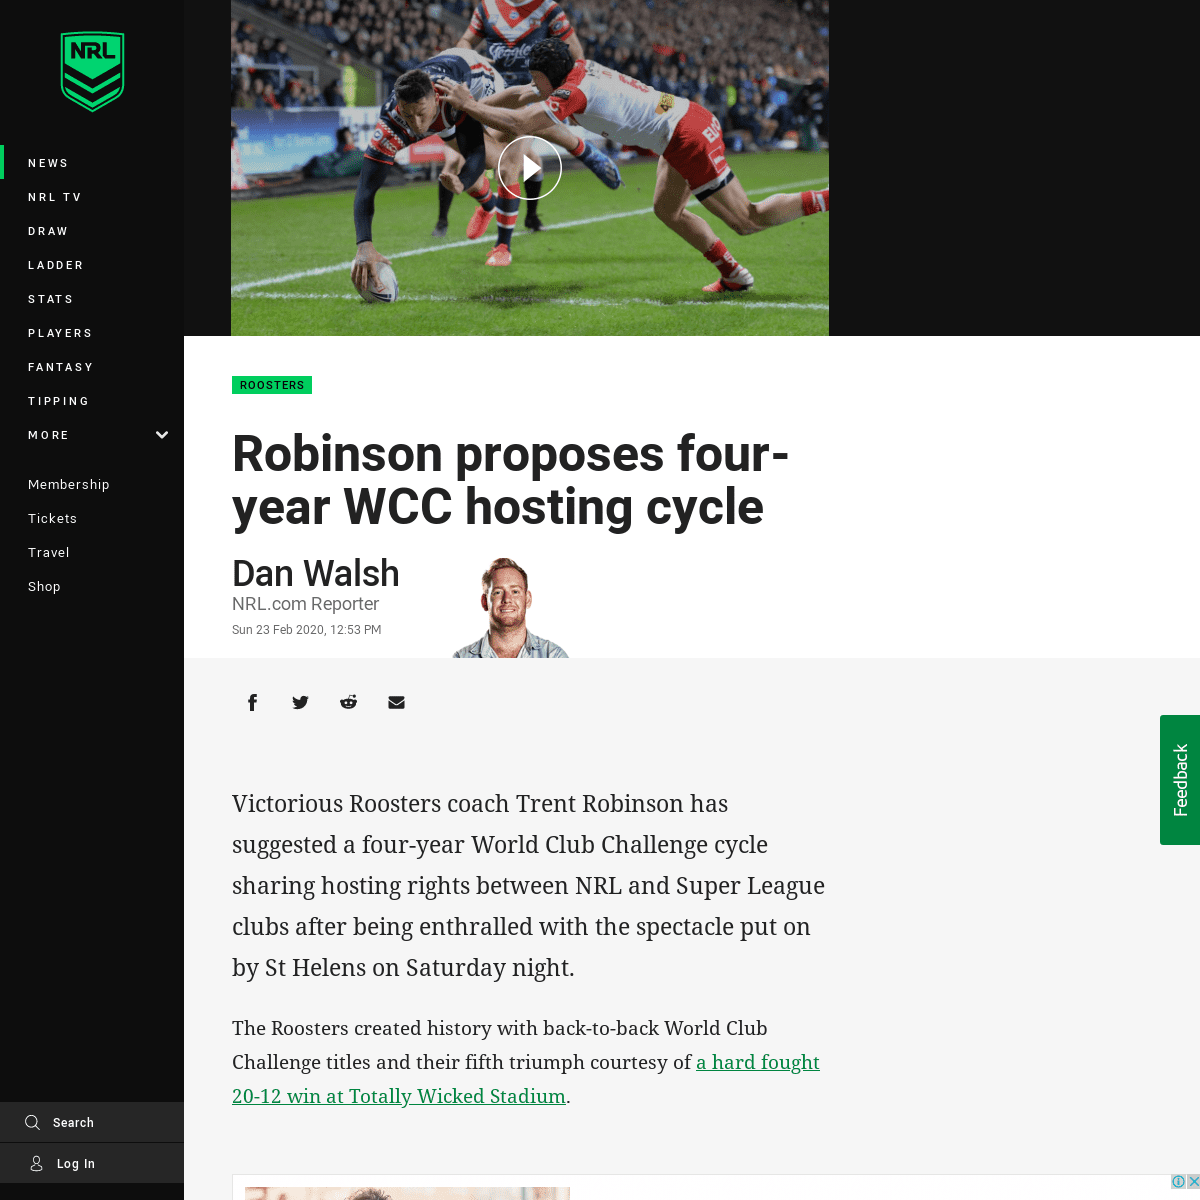 A complete backup of www.nrl.com/news/2020/02/23/robinson-proposes-four-year-wcc-hosting-cycle/